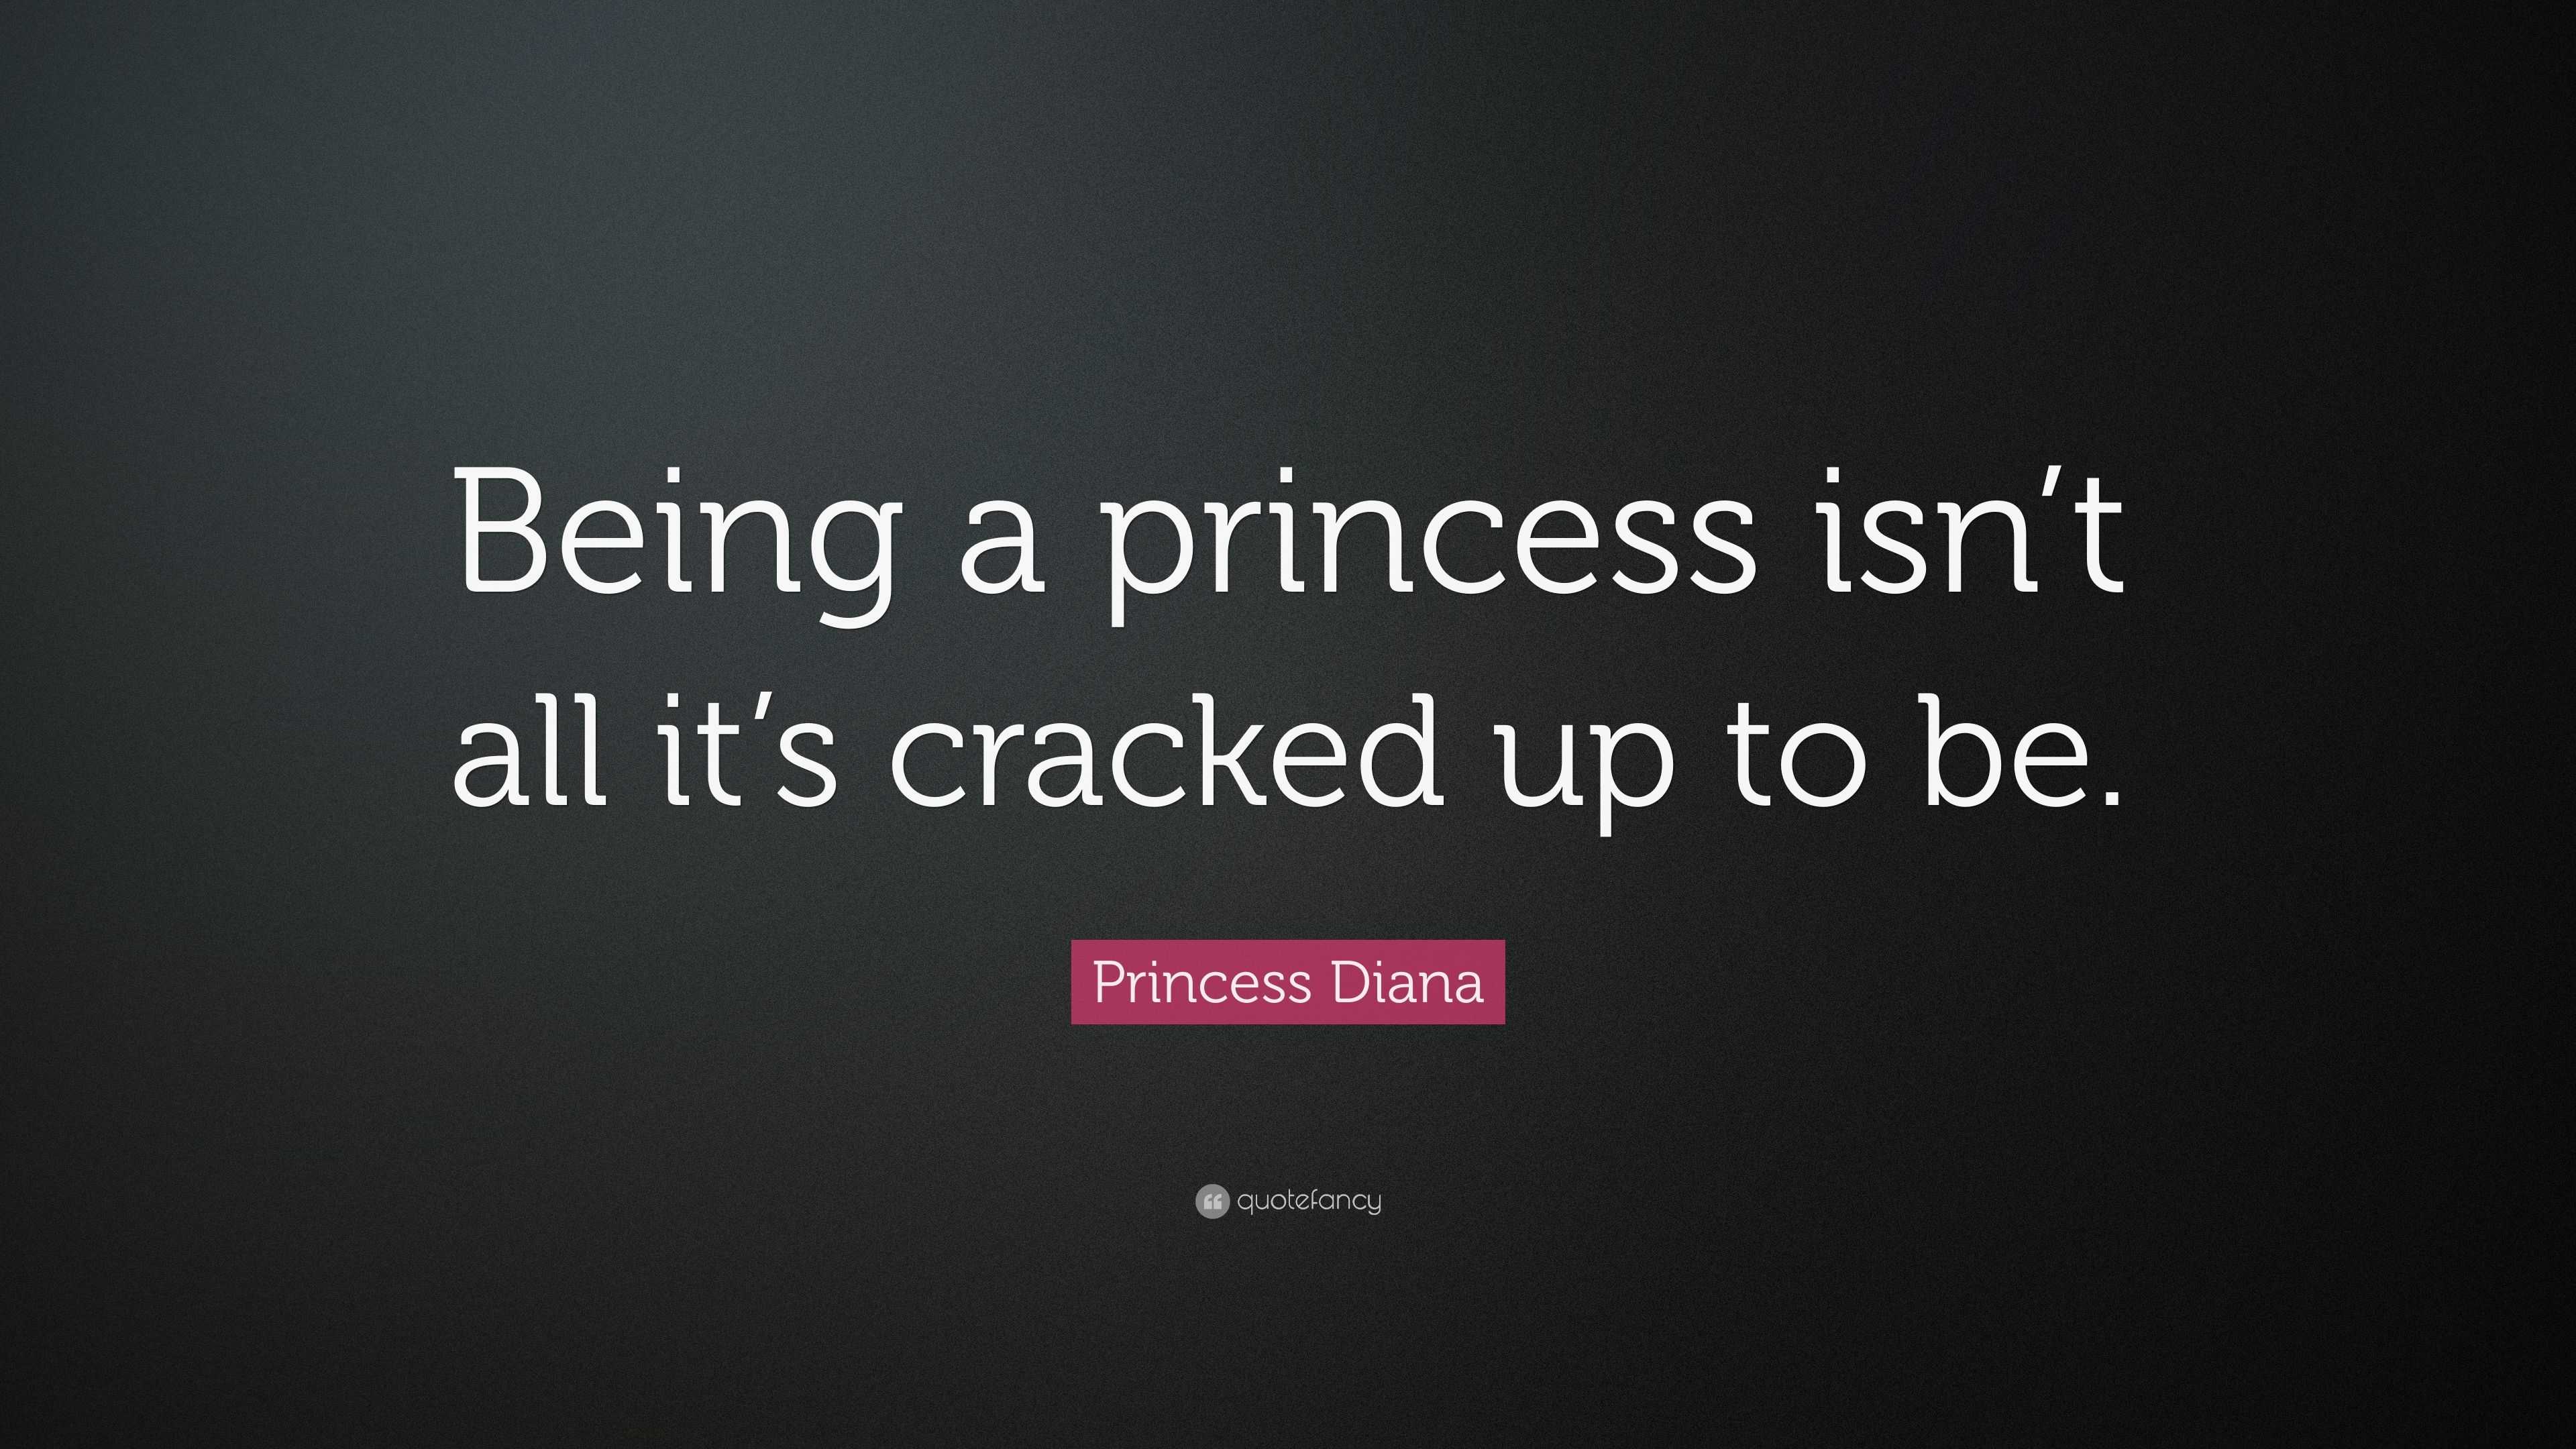 Princess Diana Quote: “Being a princess isn’t all it’s cracked up to be.”